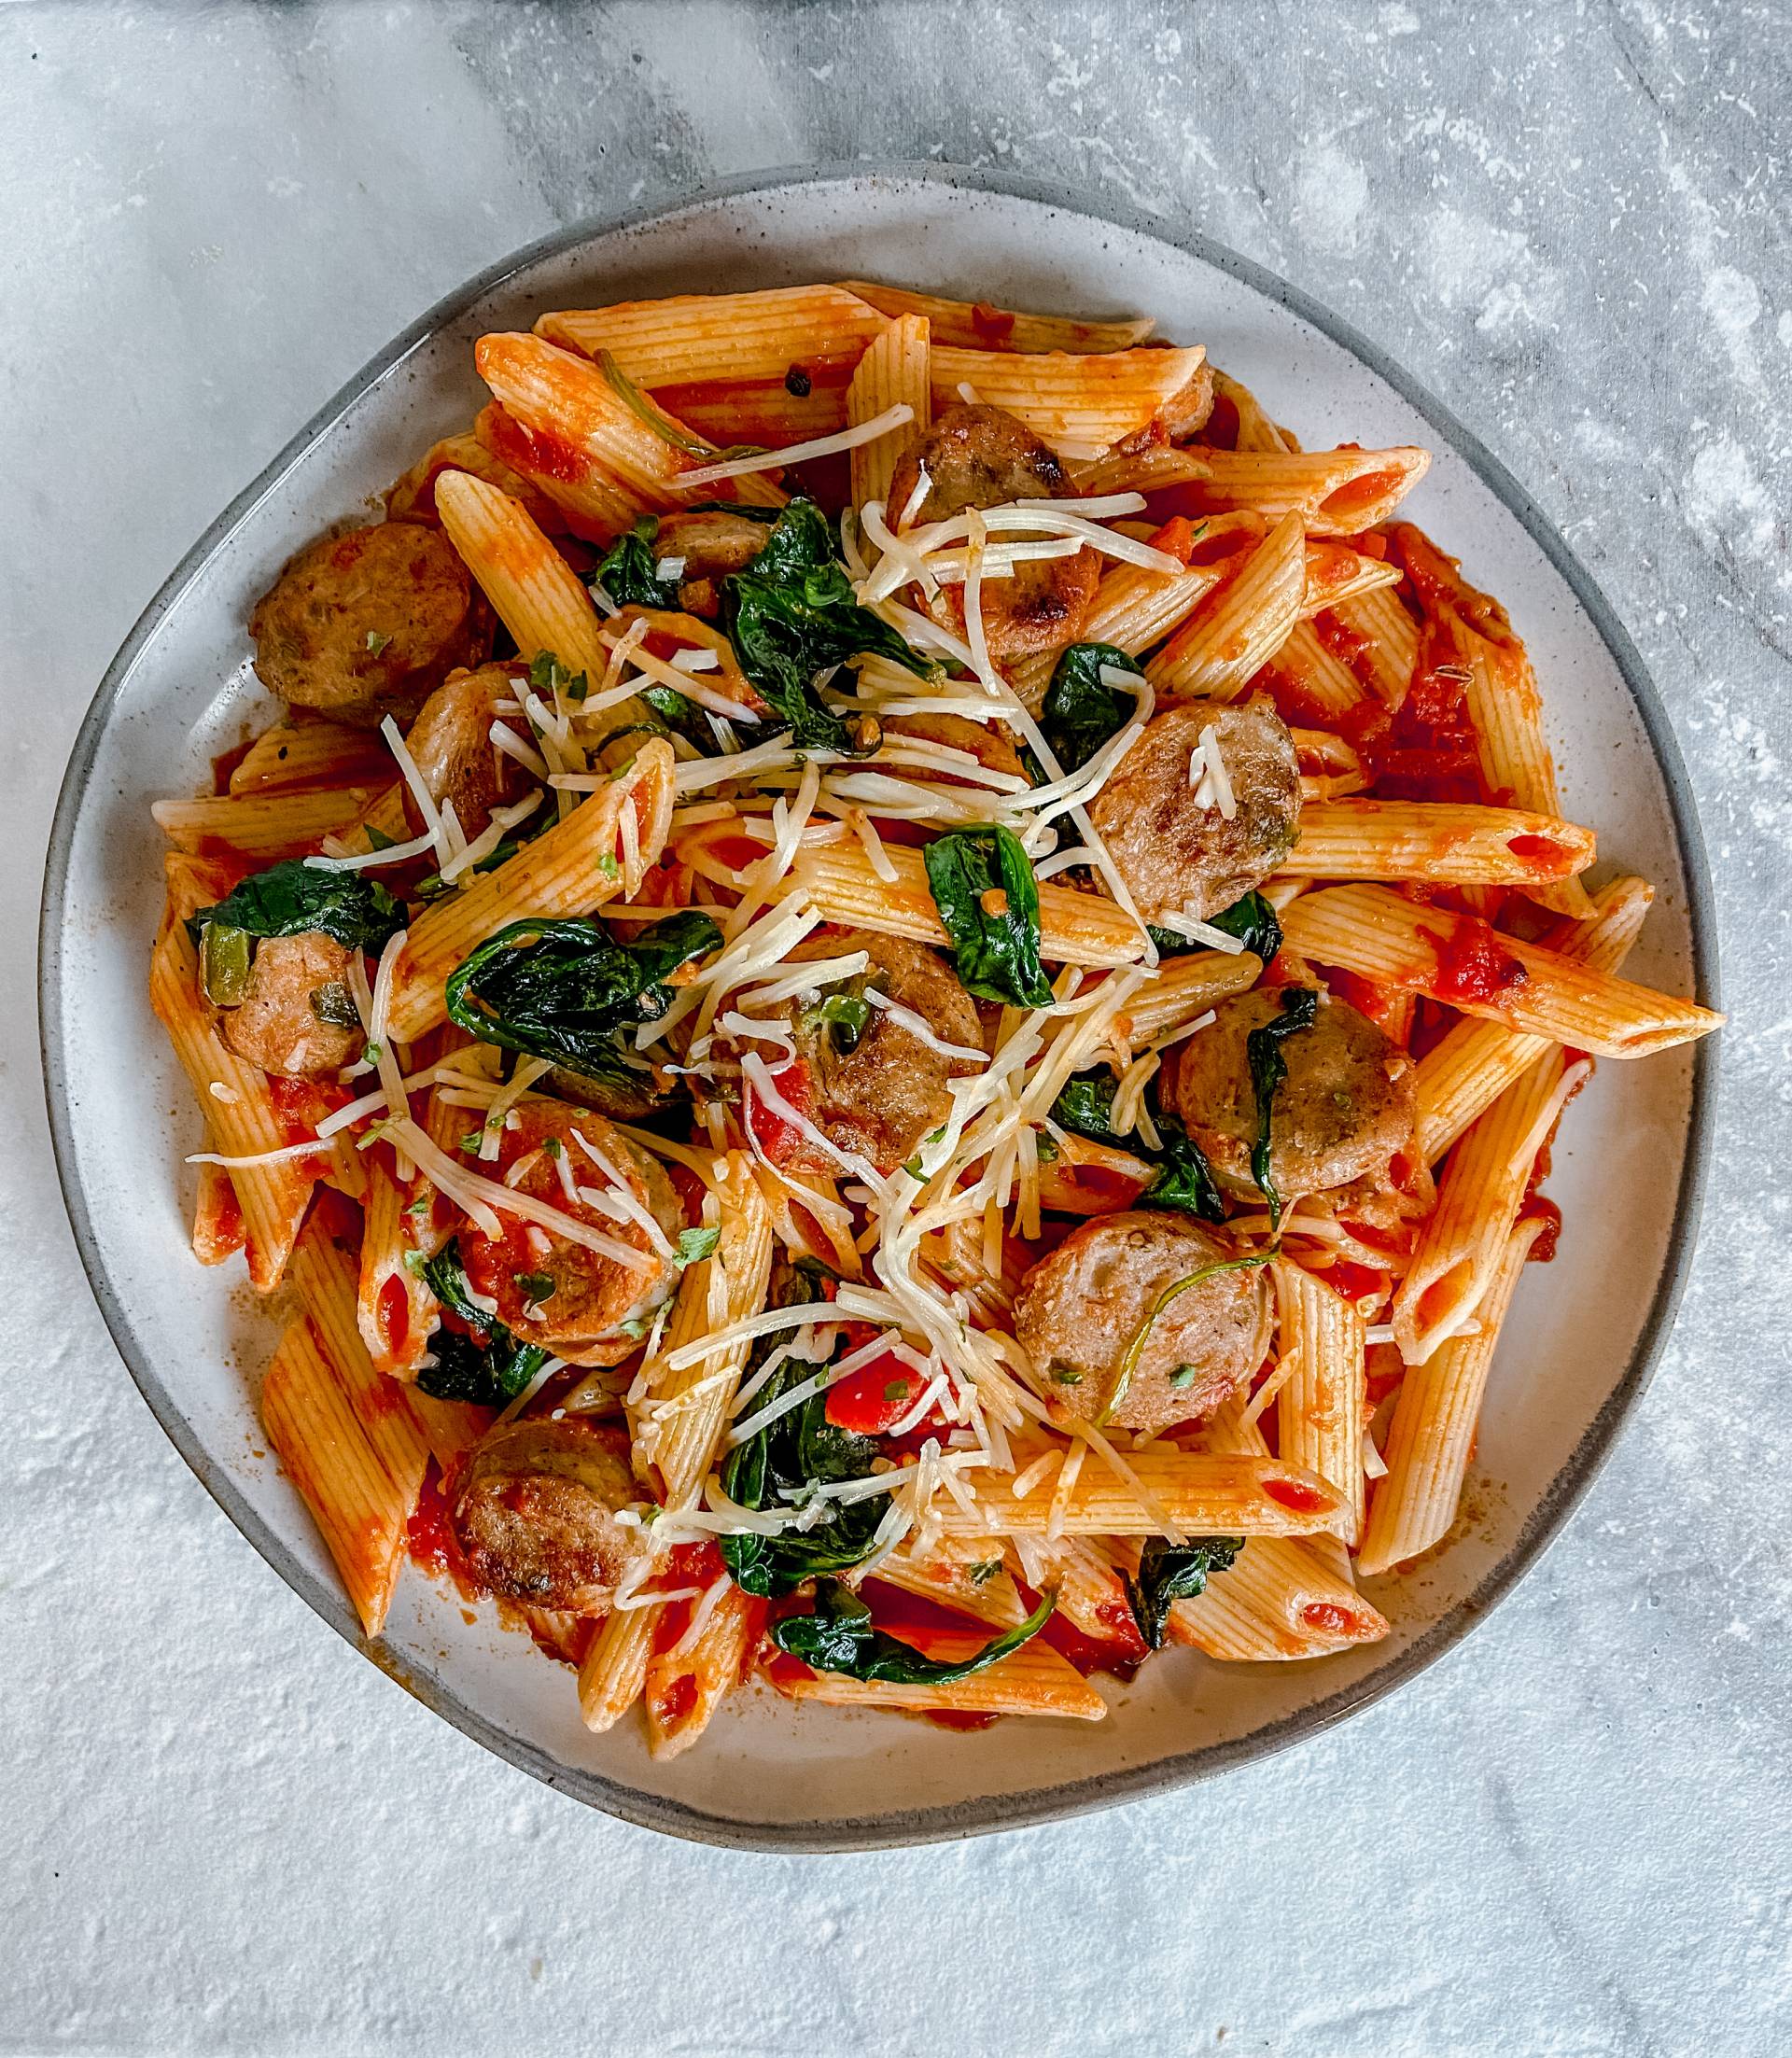 Penne Pasta with chicken sausage